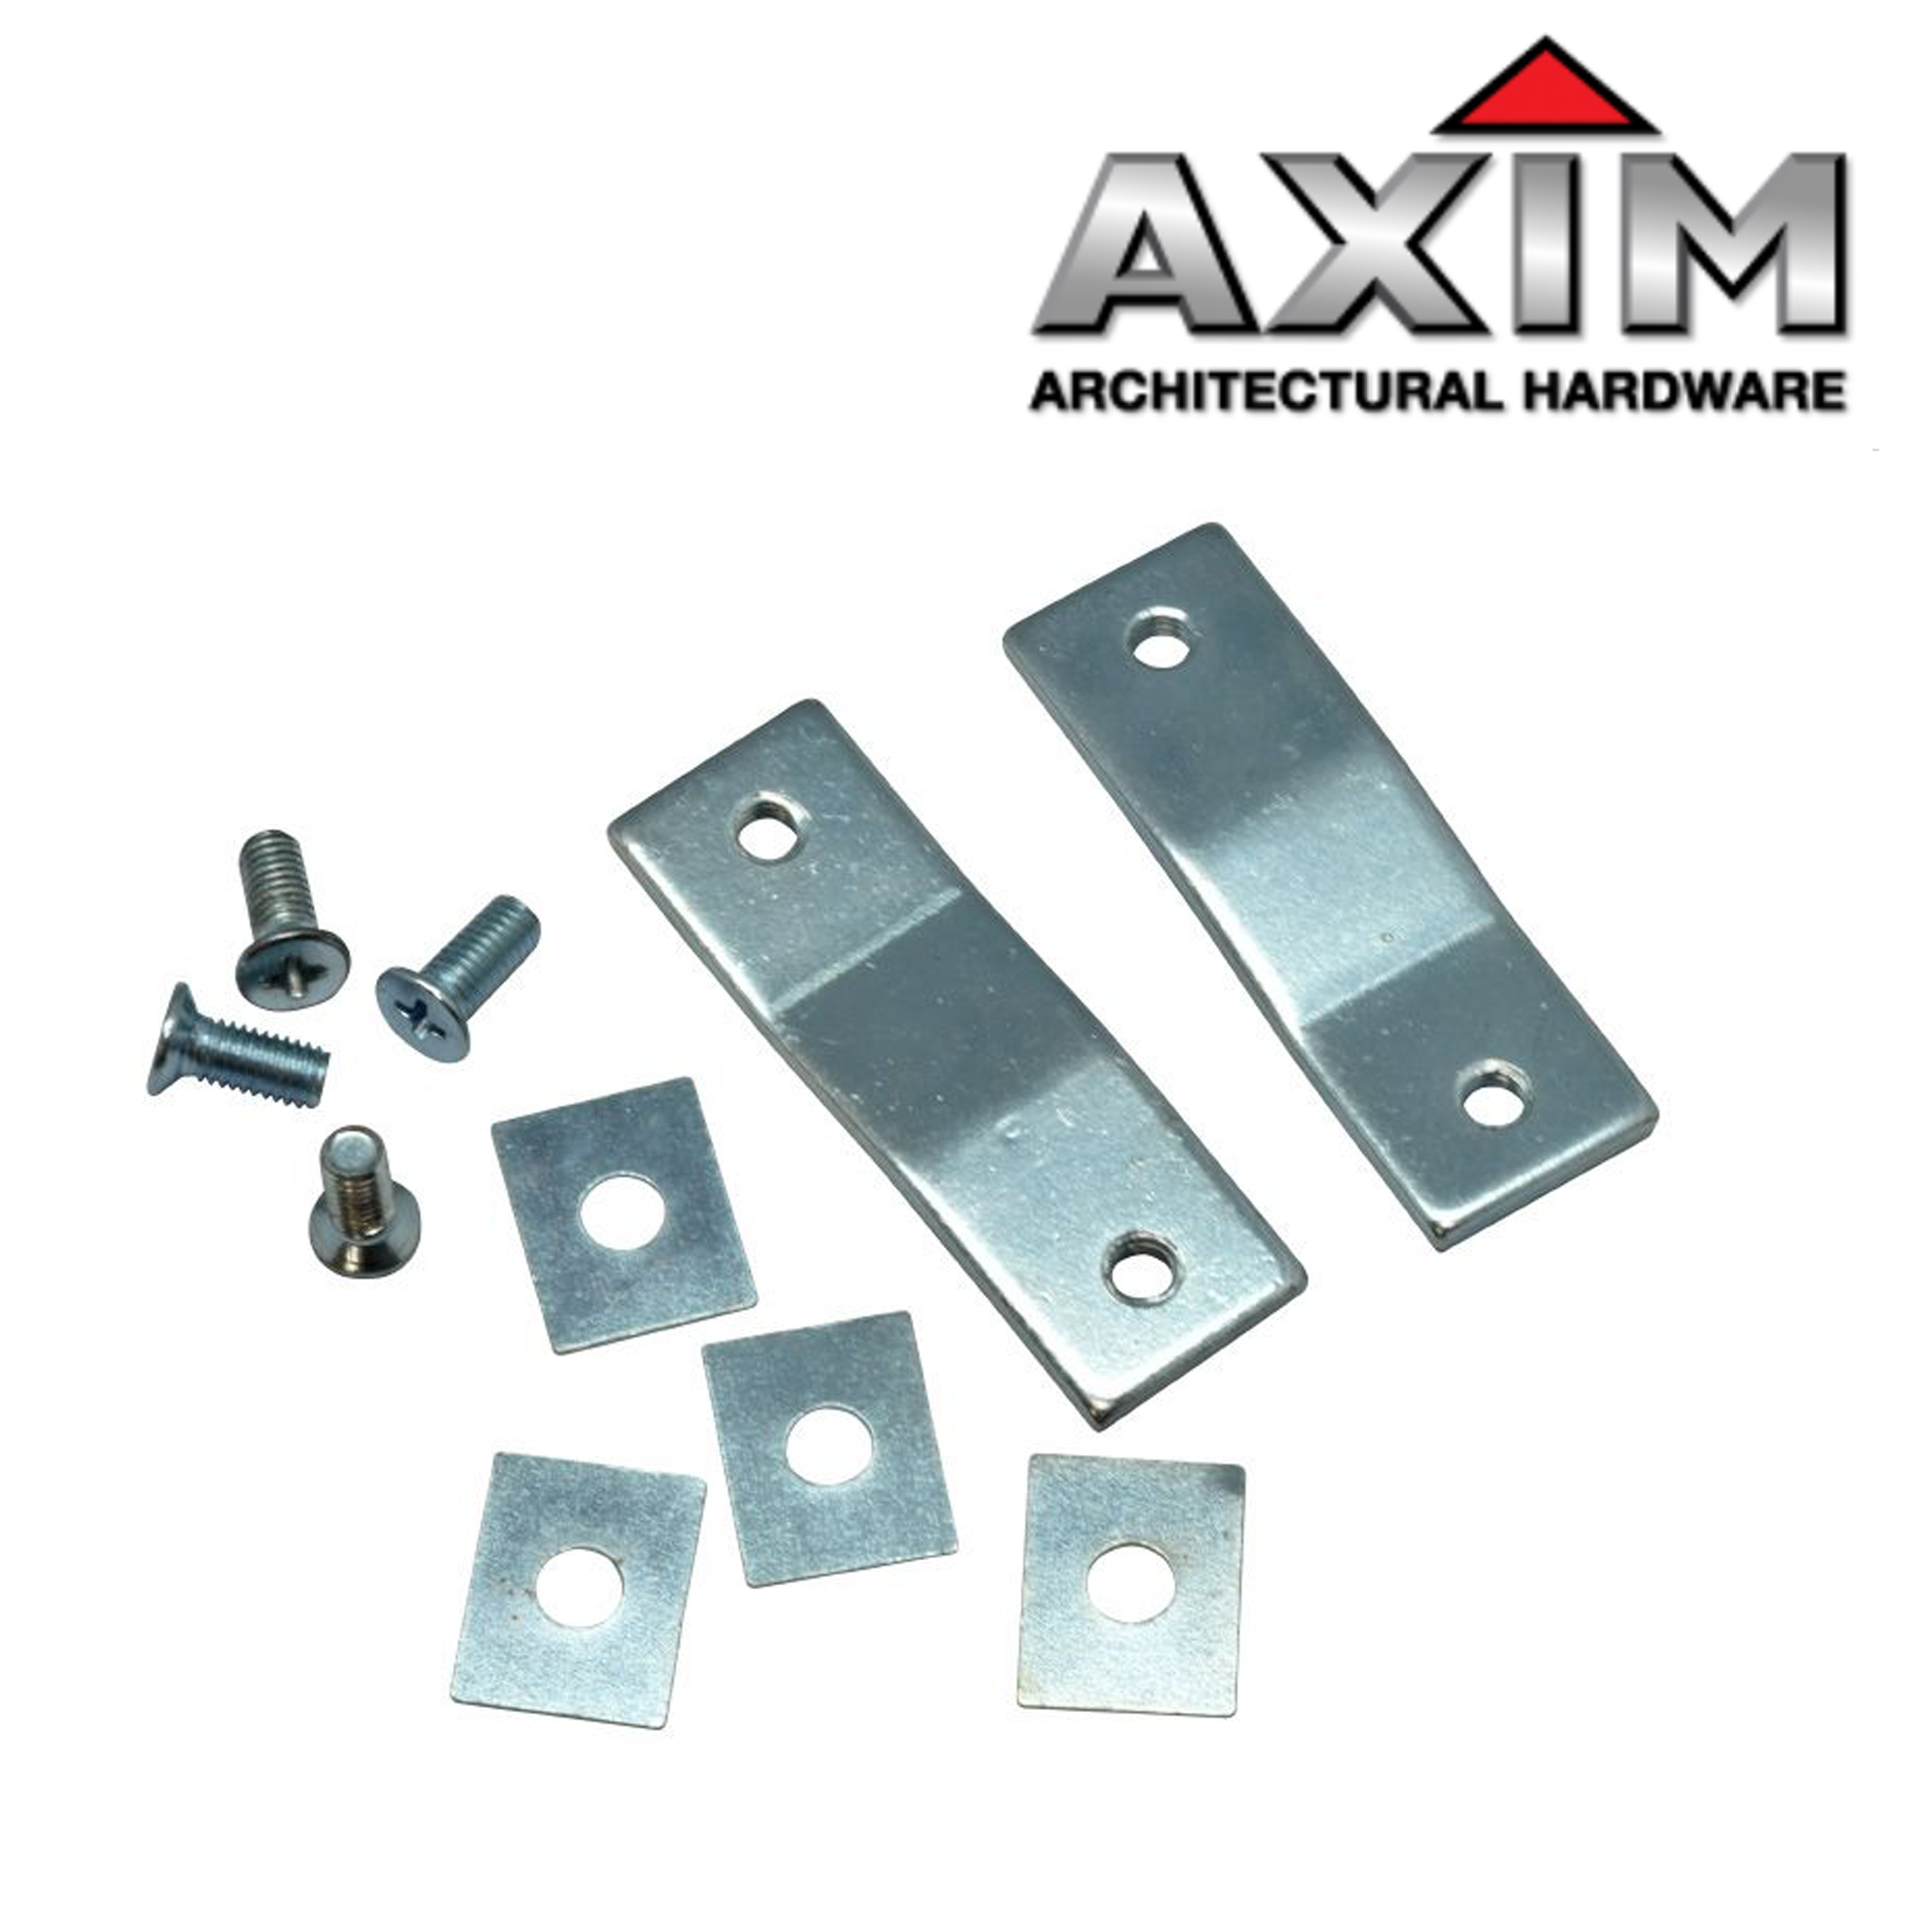 Faceplate Fixing Tab Kit for LK-2100 Series Reversible Deadlatches